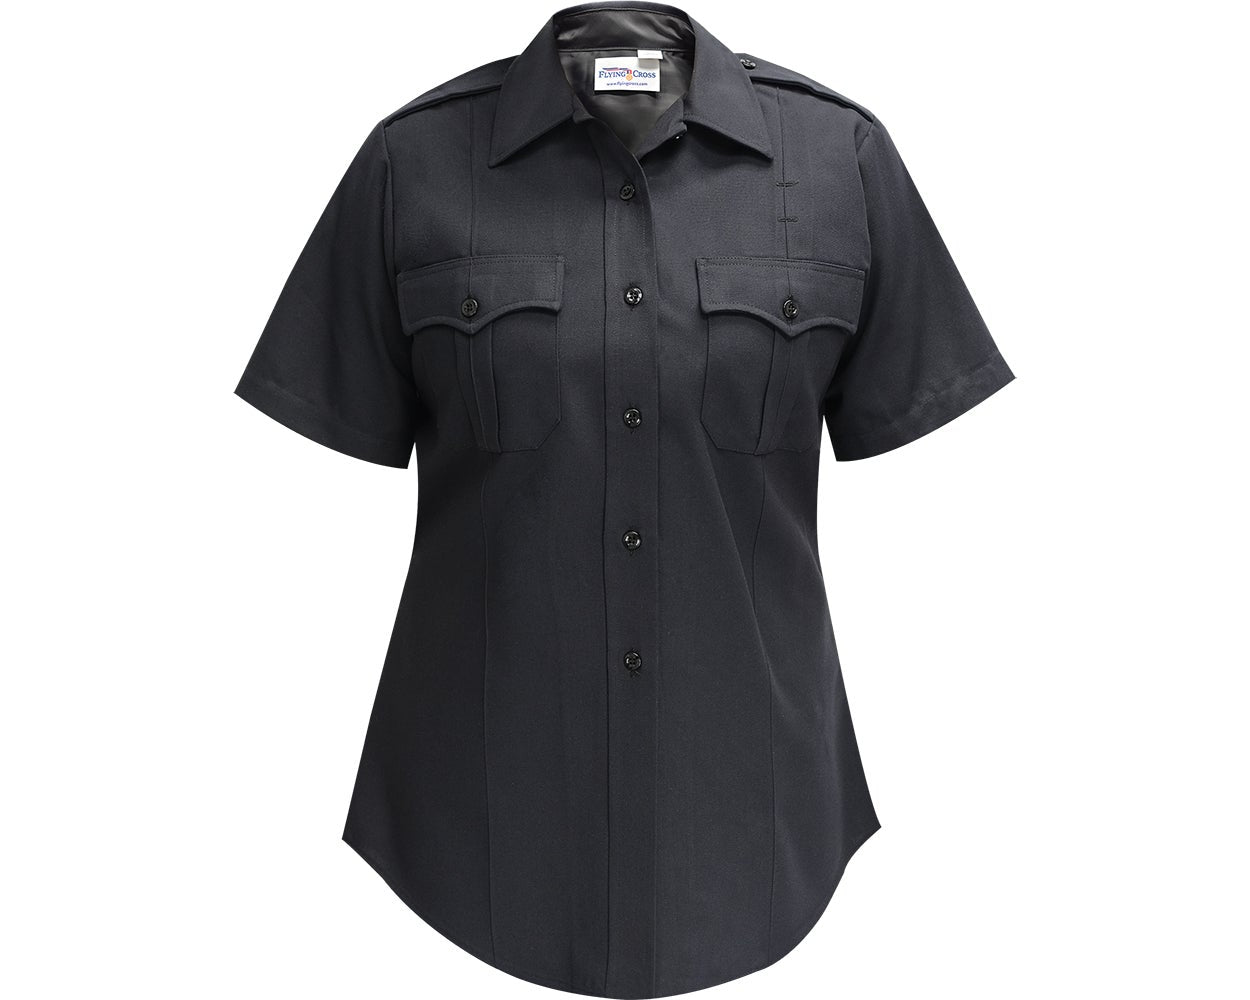 Flying Cross DELUXE TACTICAL POLY/RAYON/LYCRA WOMENS SS SHIRT LAPD NAVY